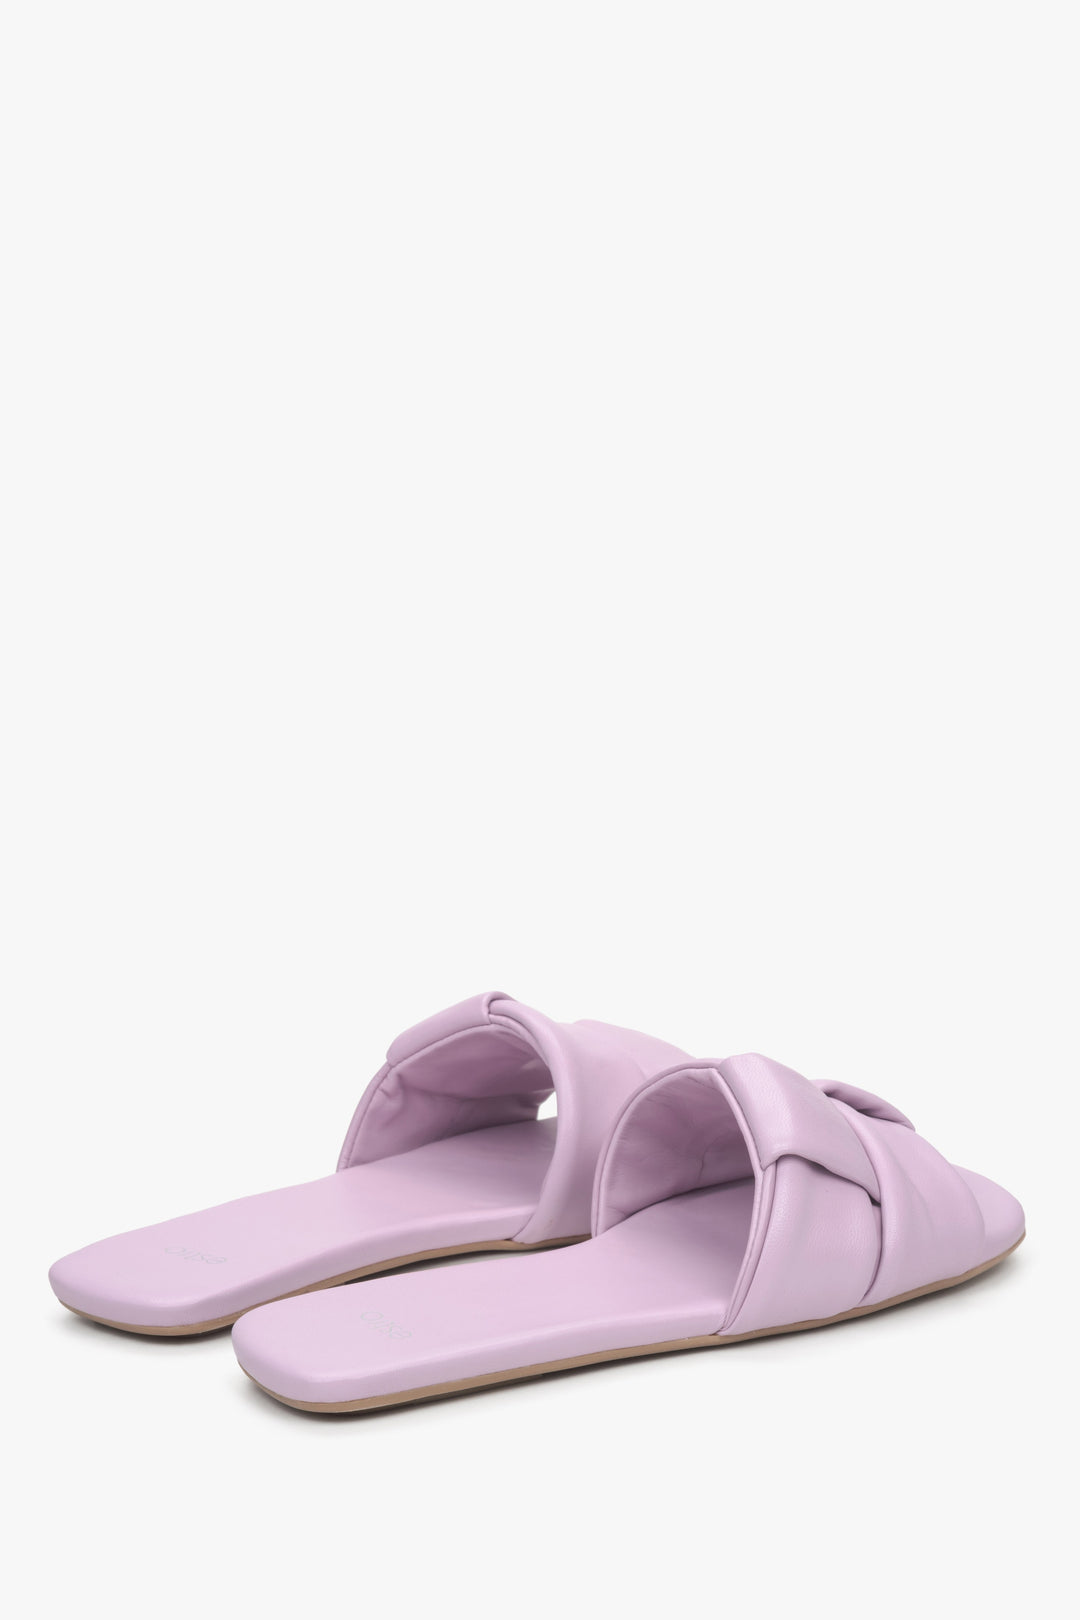 Women's Lilac Patch Leather Slide Sandals crafted by Estro